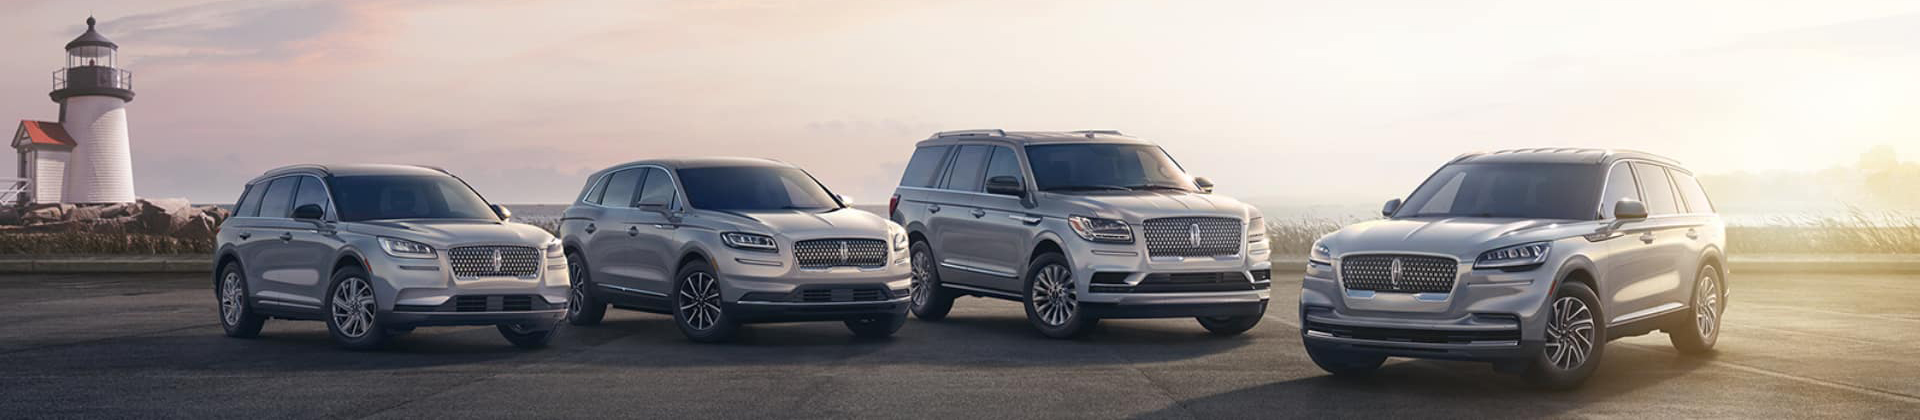 New SUV Models Parks Lincoln of Tampa